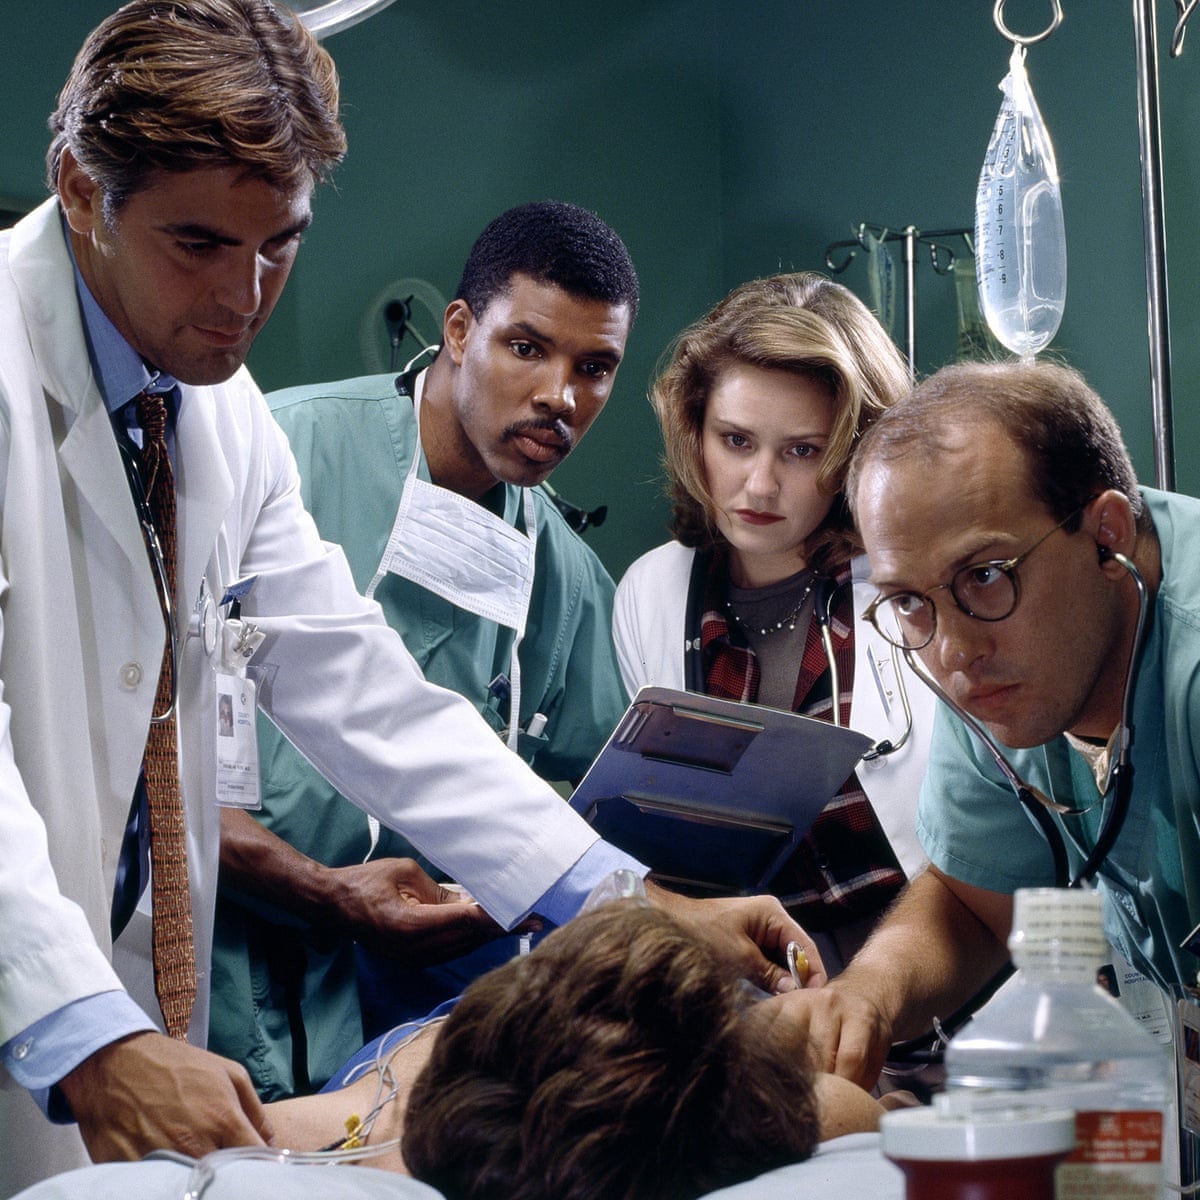 The world of medicine is the perfect setting for drama. Check out these medical TV shows with plenty of spicy action between doctors. 